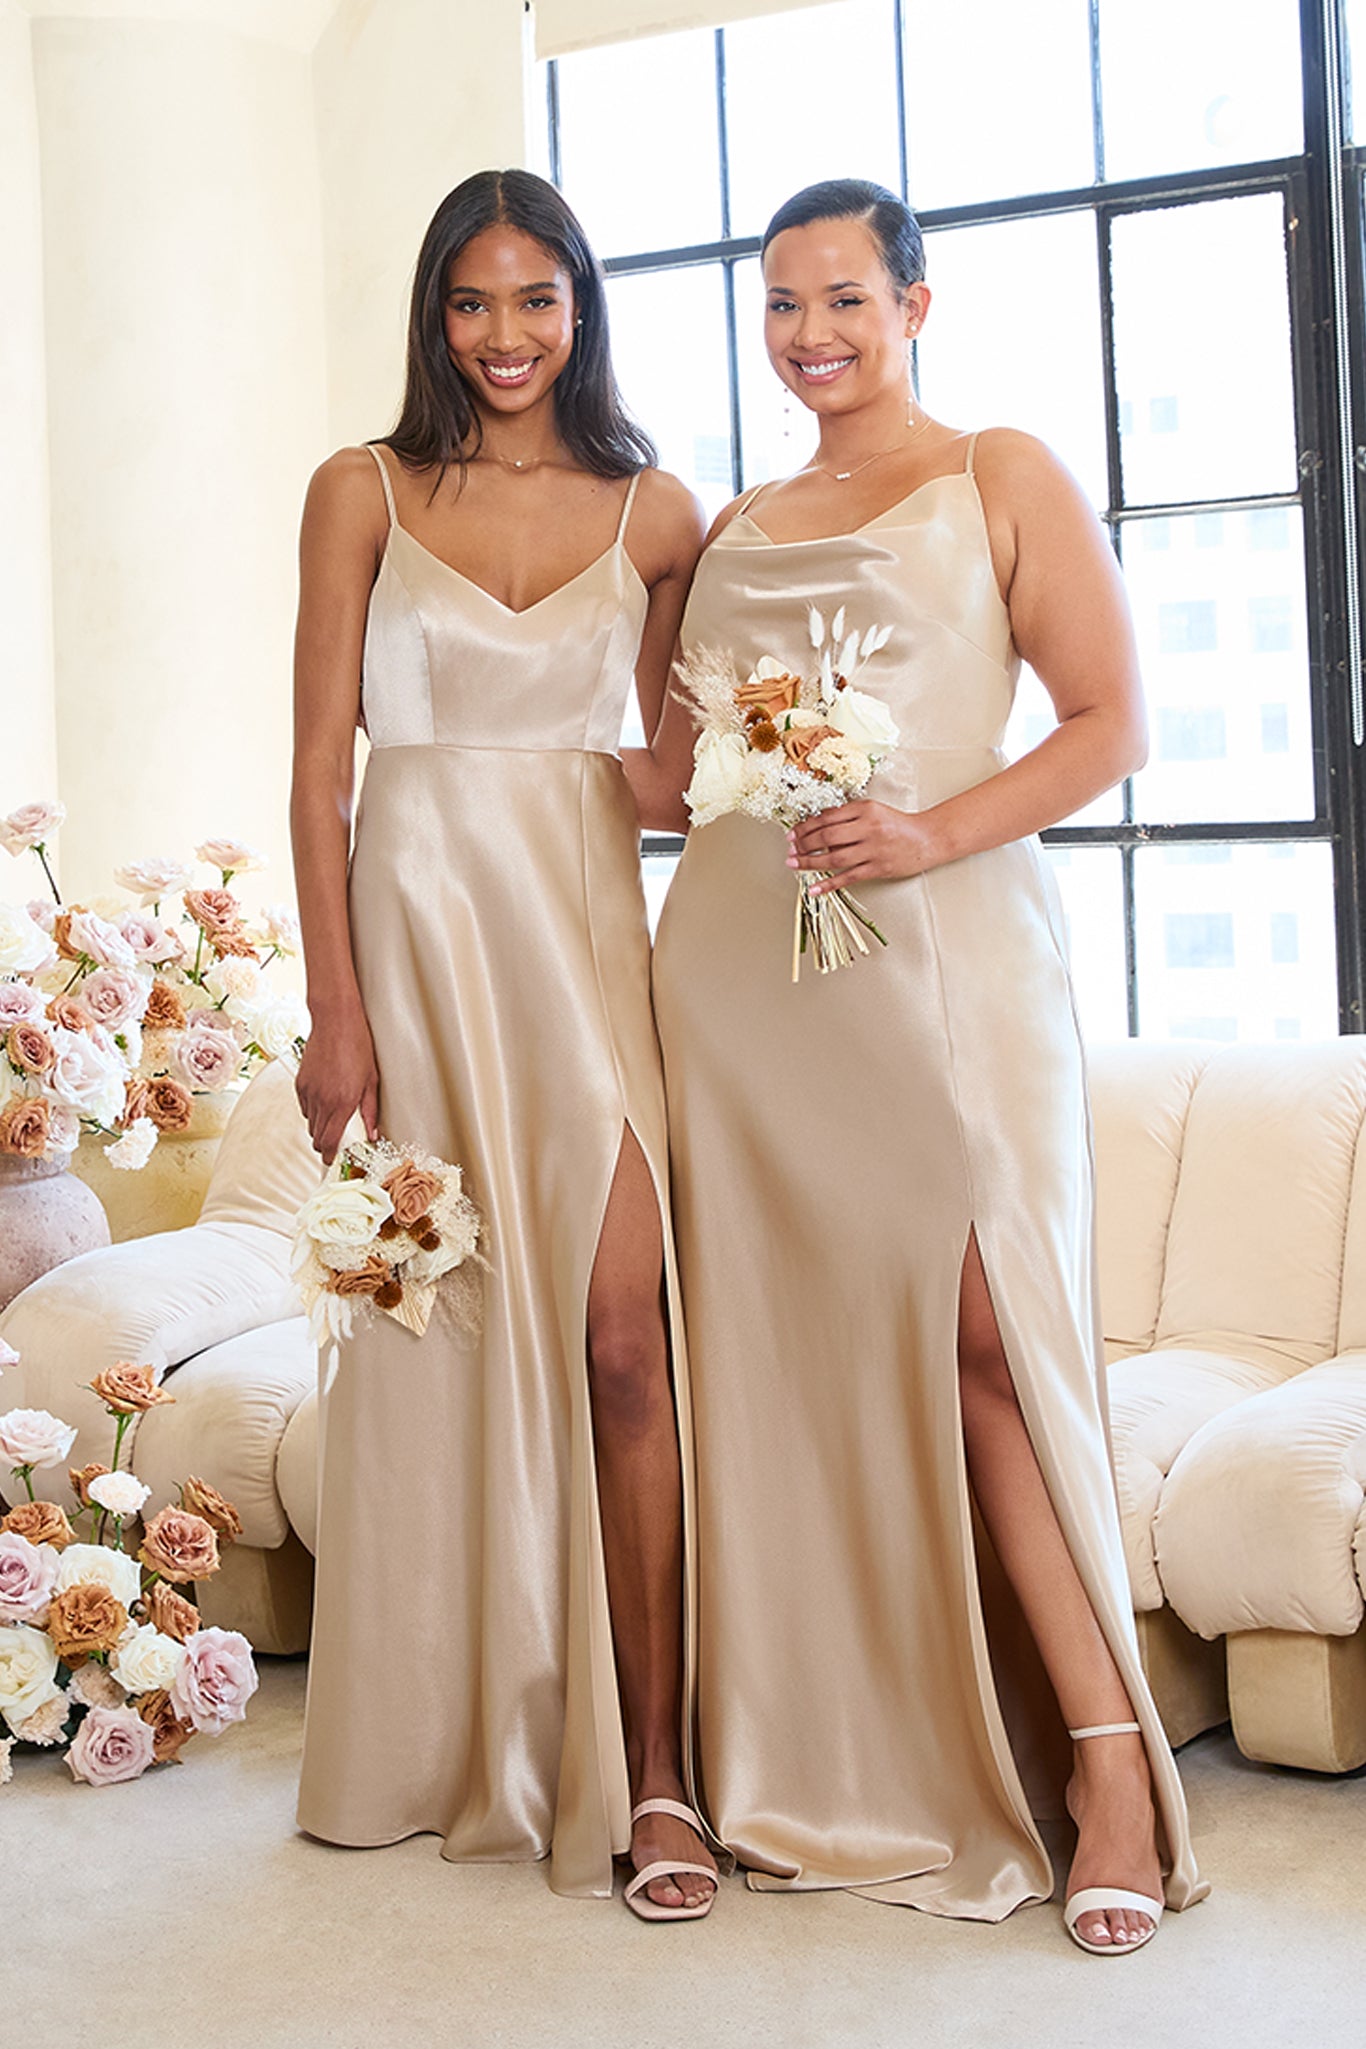 Front view of two models with their arms around each other wearing Birdy Grey Bridesmaid Dresses in neutral champagne. On the left, a slender model with a medium skin tone wears the Jay Bridesmaid Dress. On the right, a curvy model with a light skin tone wears the Lisa Long Plus Size Bridesmaid Dress.